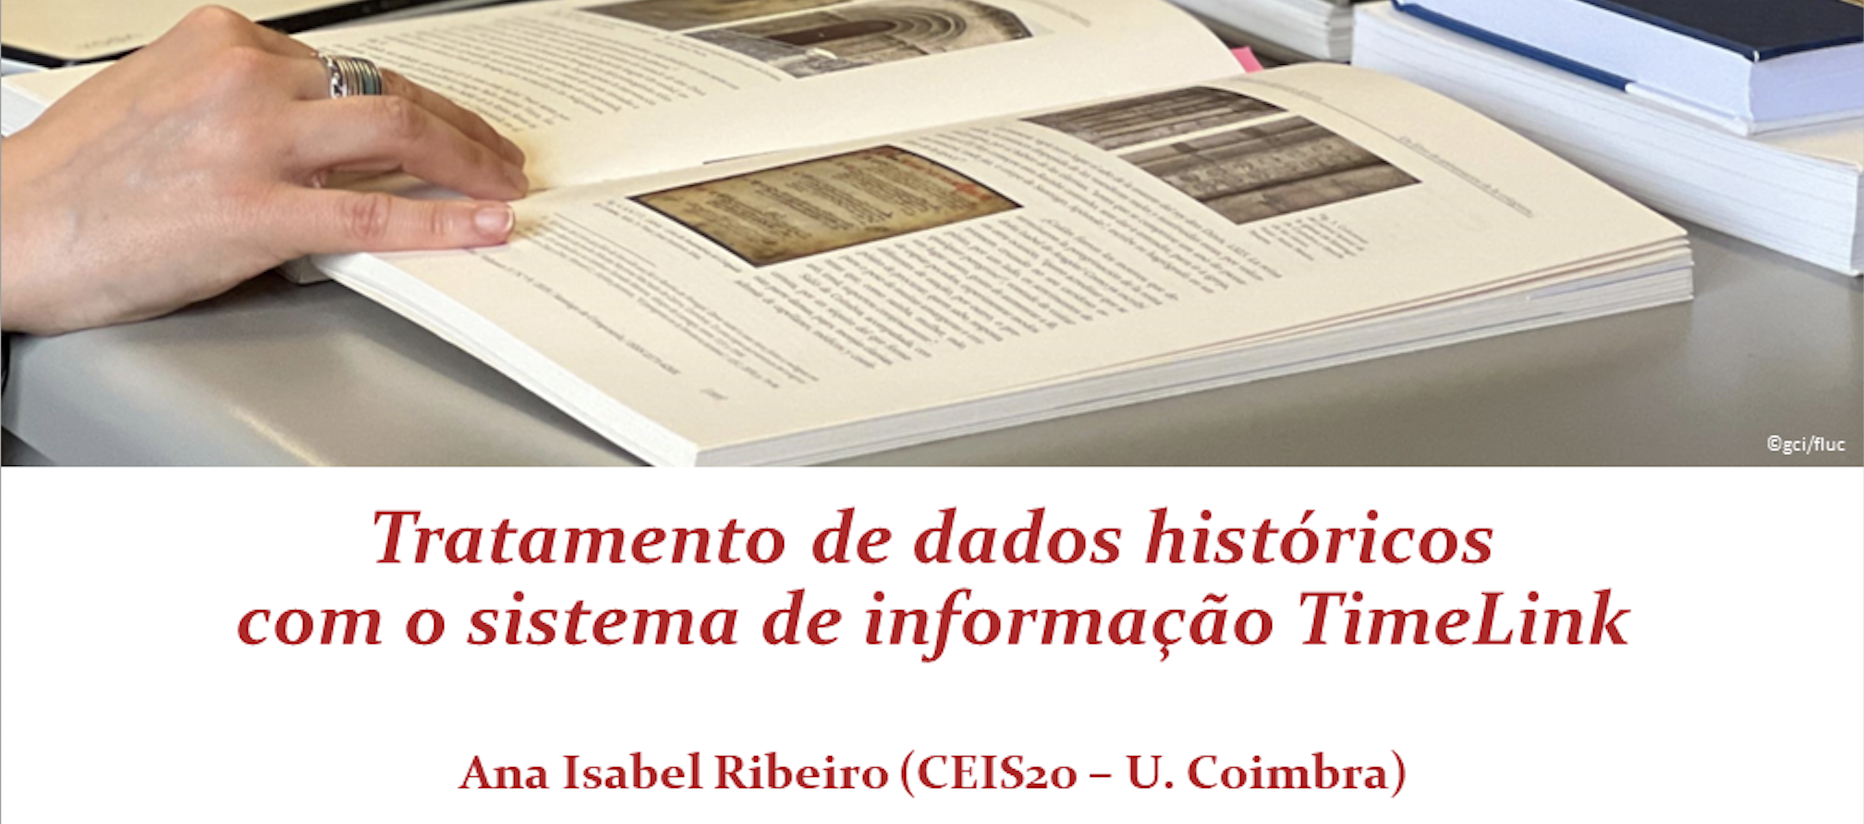 Historical data treatment with the TimeLink information system, by Ana Isabel Ribeiro (Ceis20)